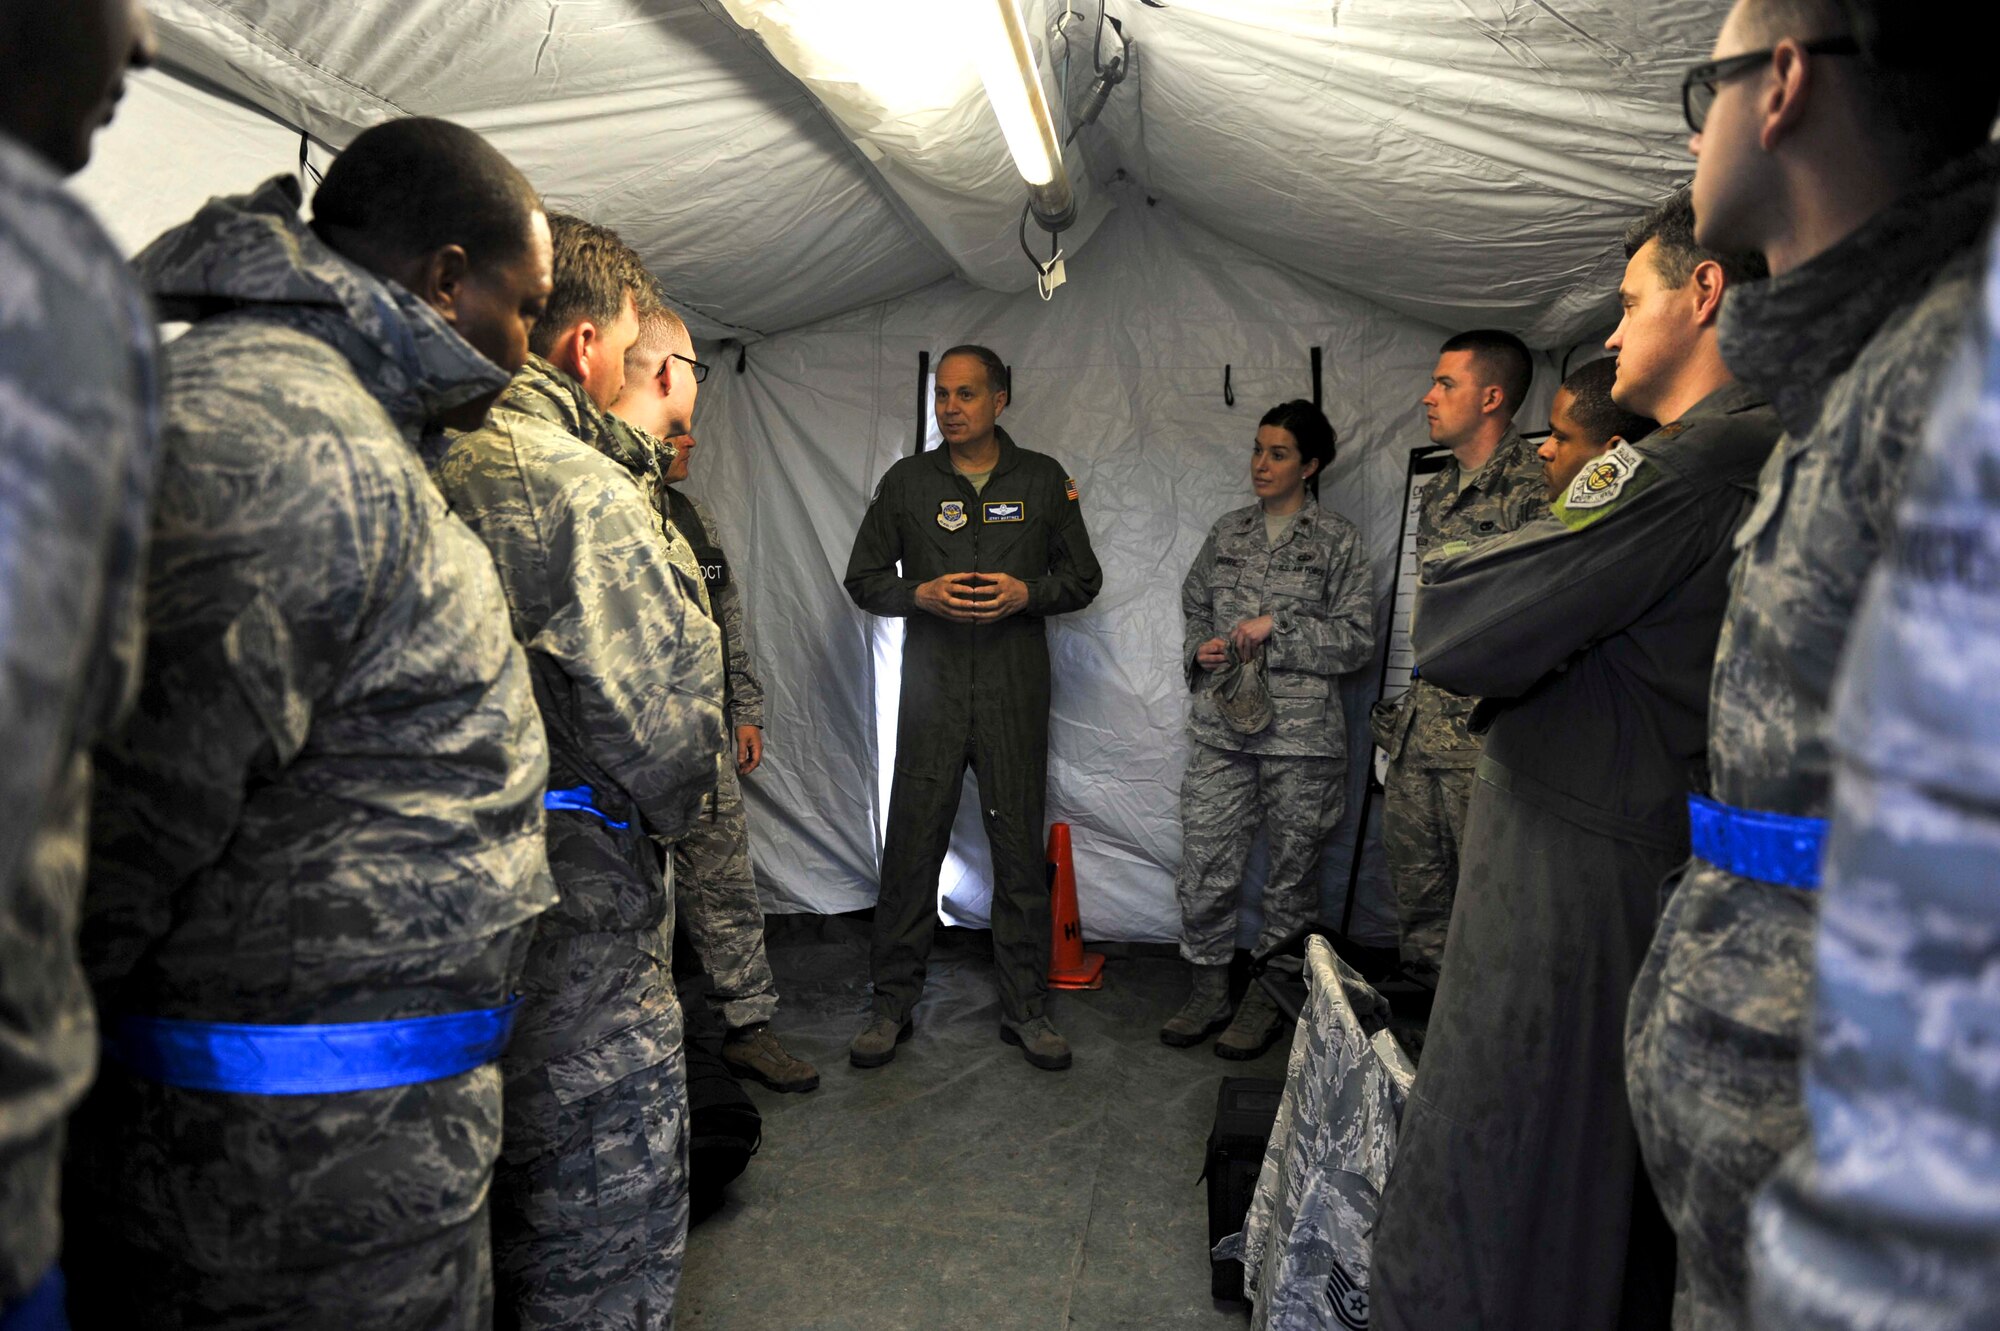 U.S. Air Force Maj. Gen. Jerry Martinez, Air Mobility Command Director of Operations, meets with Airfield Operations Airmen from McGuire Air Force base April 18, 2016, at Fort Polk, La., during Green Flag 16-06.  The Royal Australian Air Force, Royal New Zealand Air Force and U.S. Air Force train during Green Flag Little Rock to ensure all aircrew can effectively communicate. (U.S. Air Force photo by Staff Sgt. Jeremy McGuffin)
